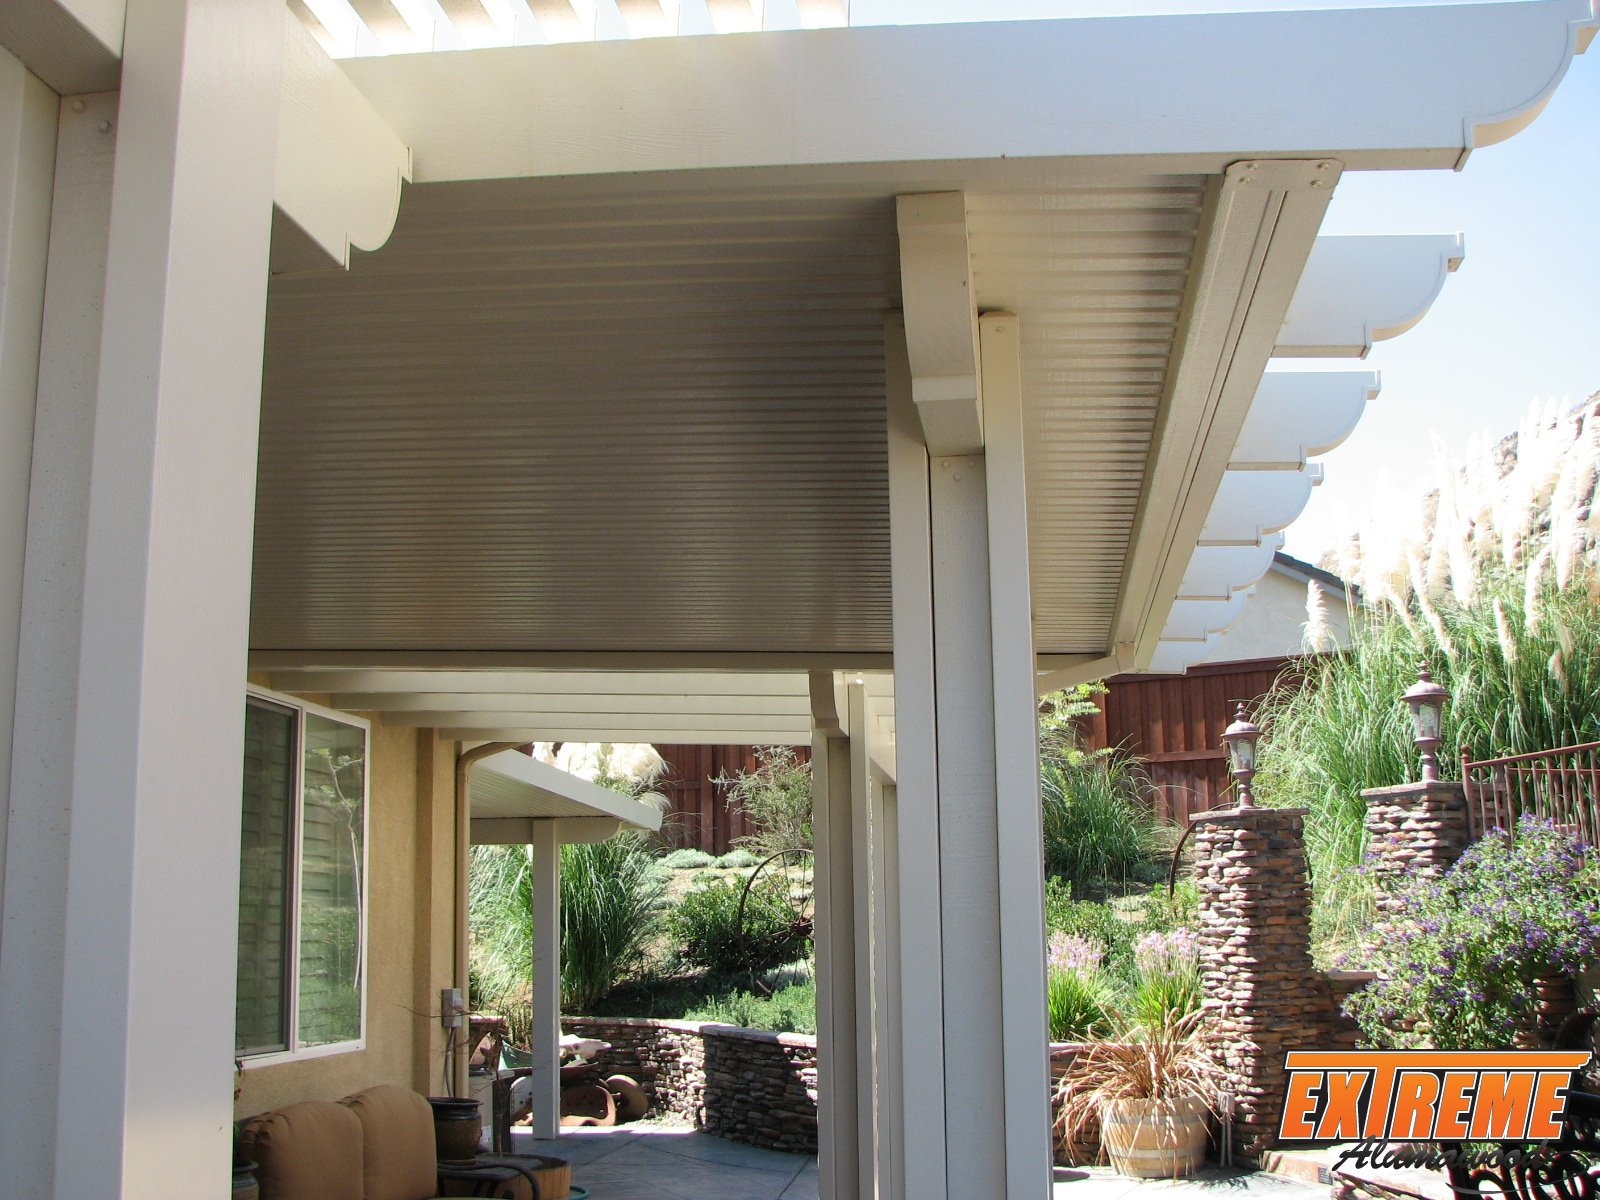 Murrieta Alumatech Patio Covers Extreme Patio Covers throughout proportions 1600 X 1200